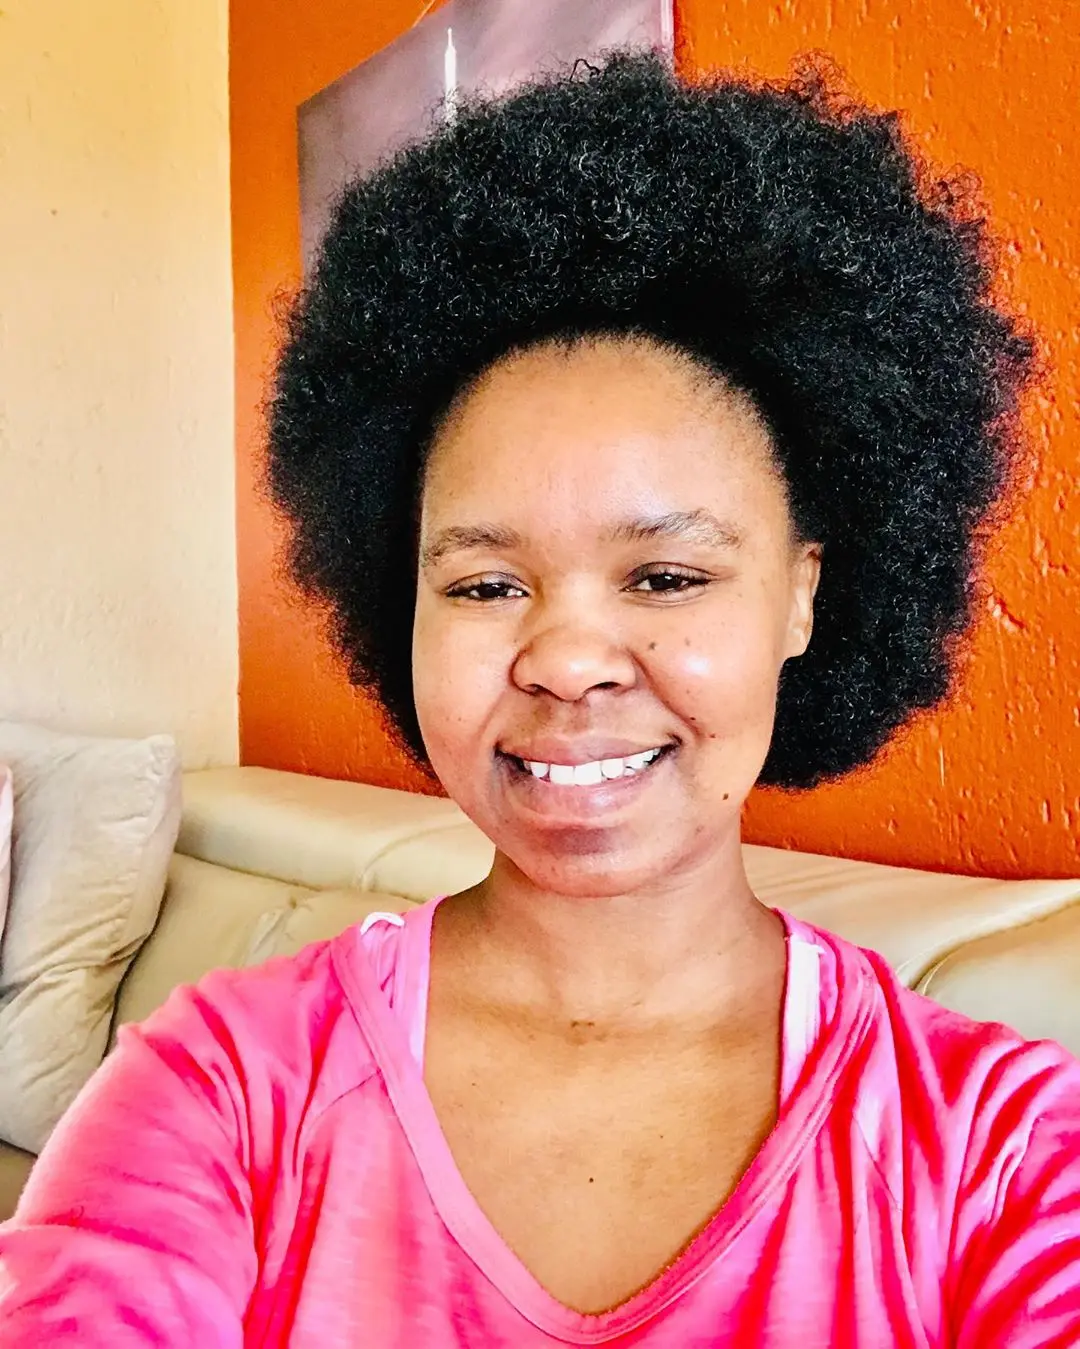 Zahara claims to be in a good space after almost losing her home